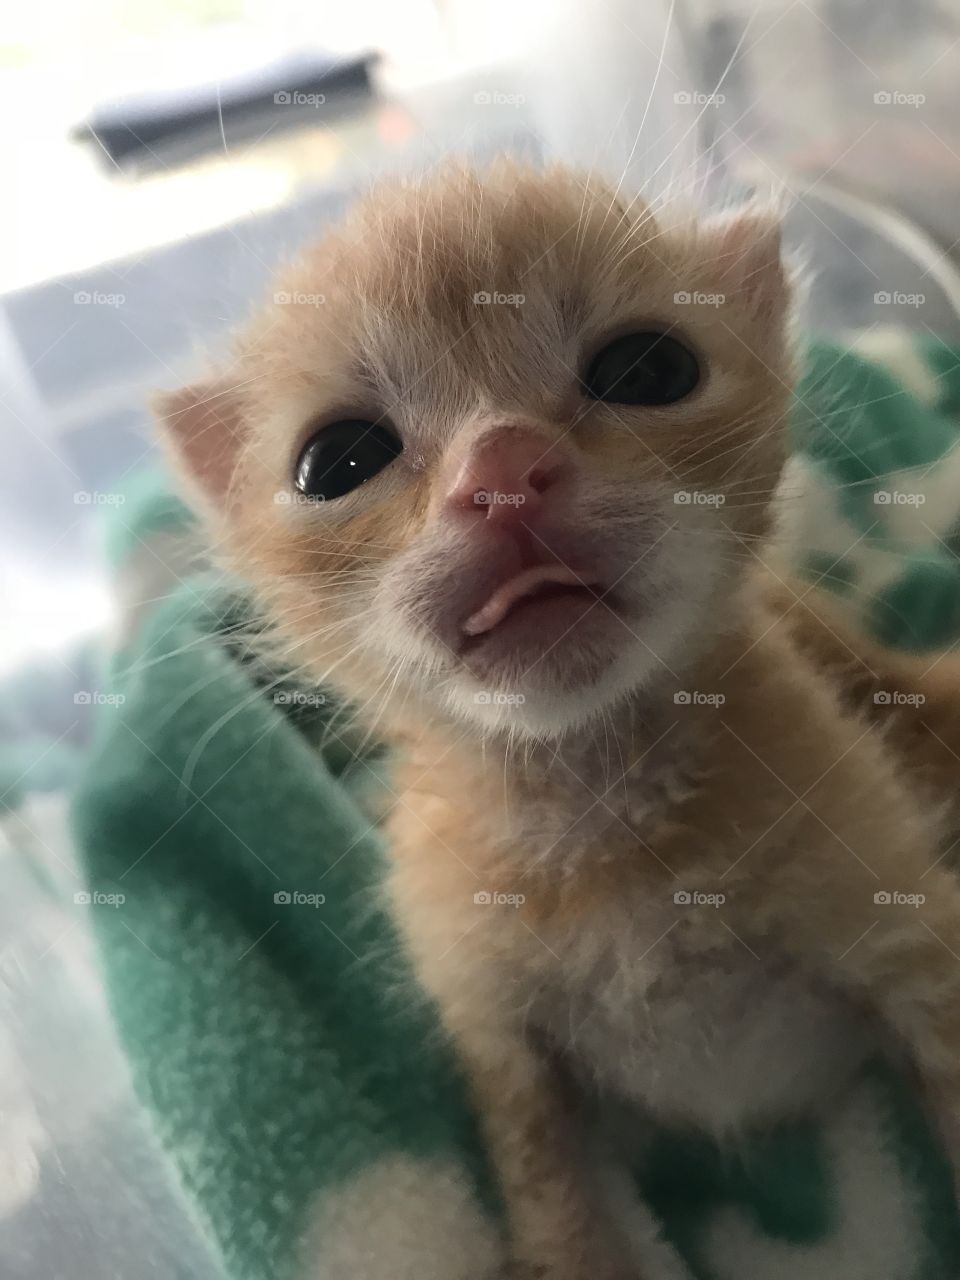 The faces of kitten rescue